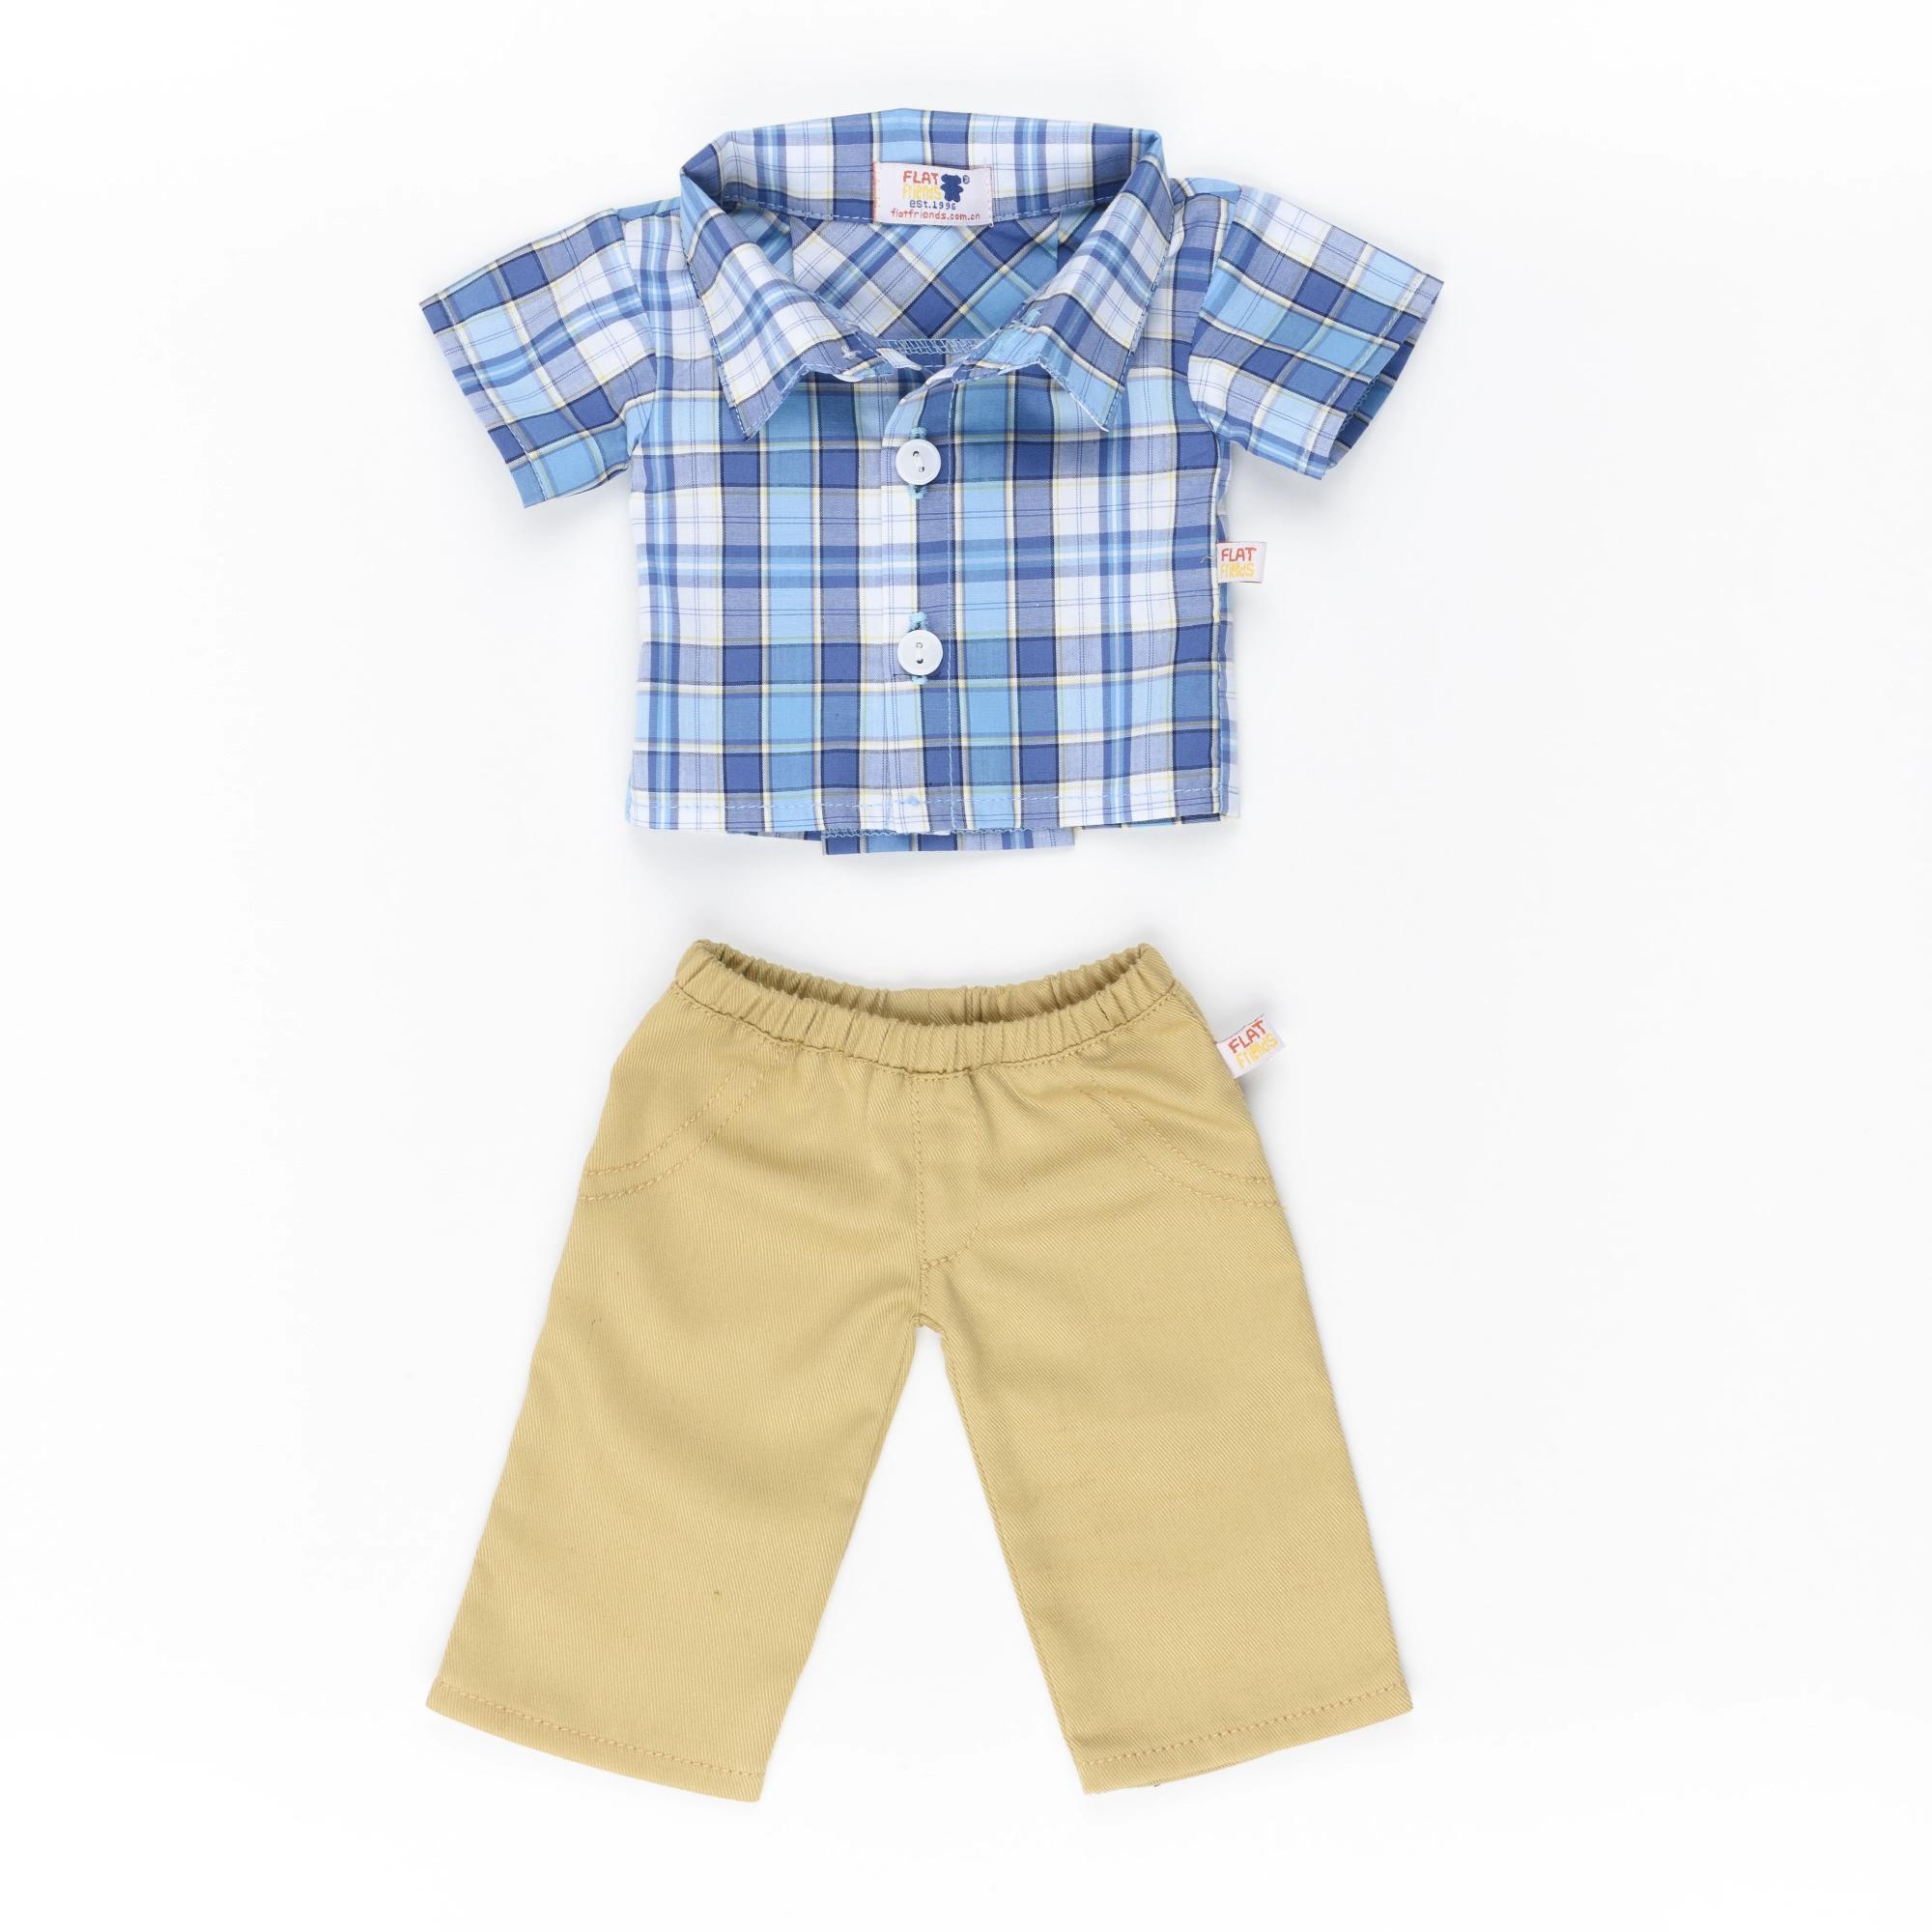 Hand Puppet Clothing - Pant and Shirt Outfit